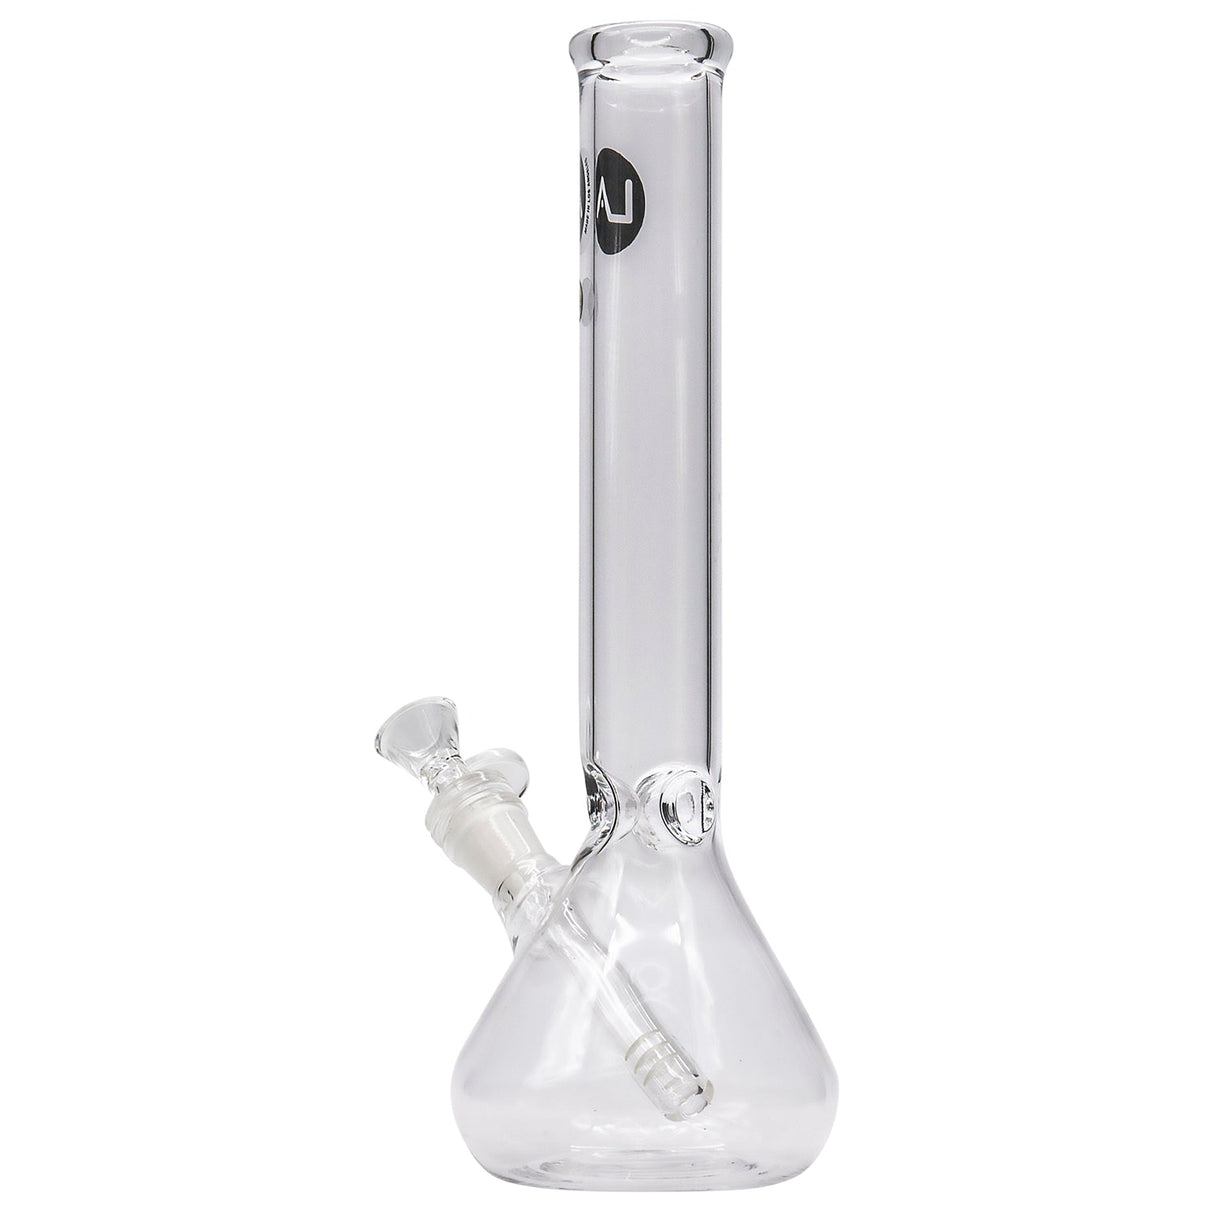 LA Pipes 12" Classic Beaker Bong made of Borosilicate Glass, front view on white background